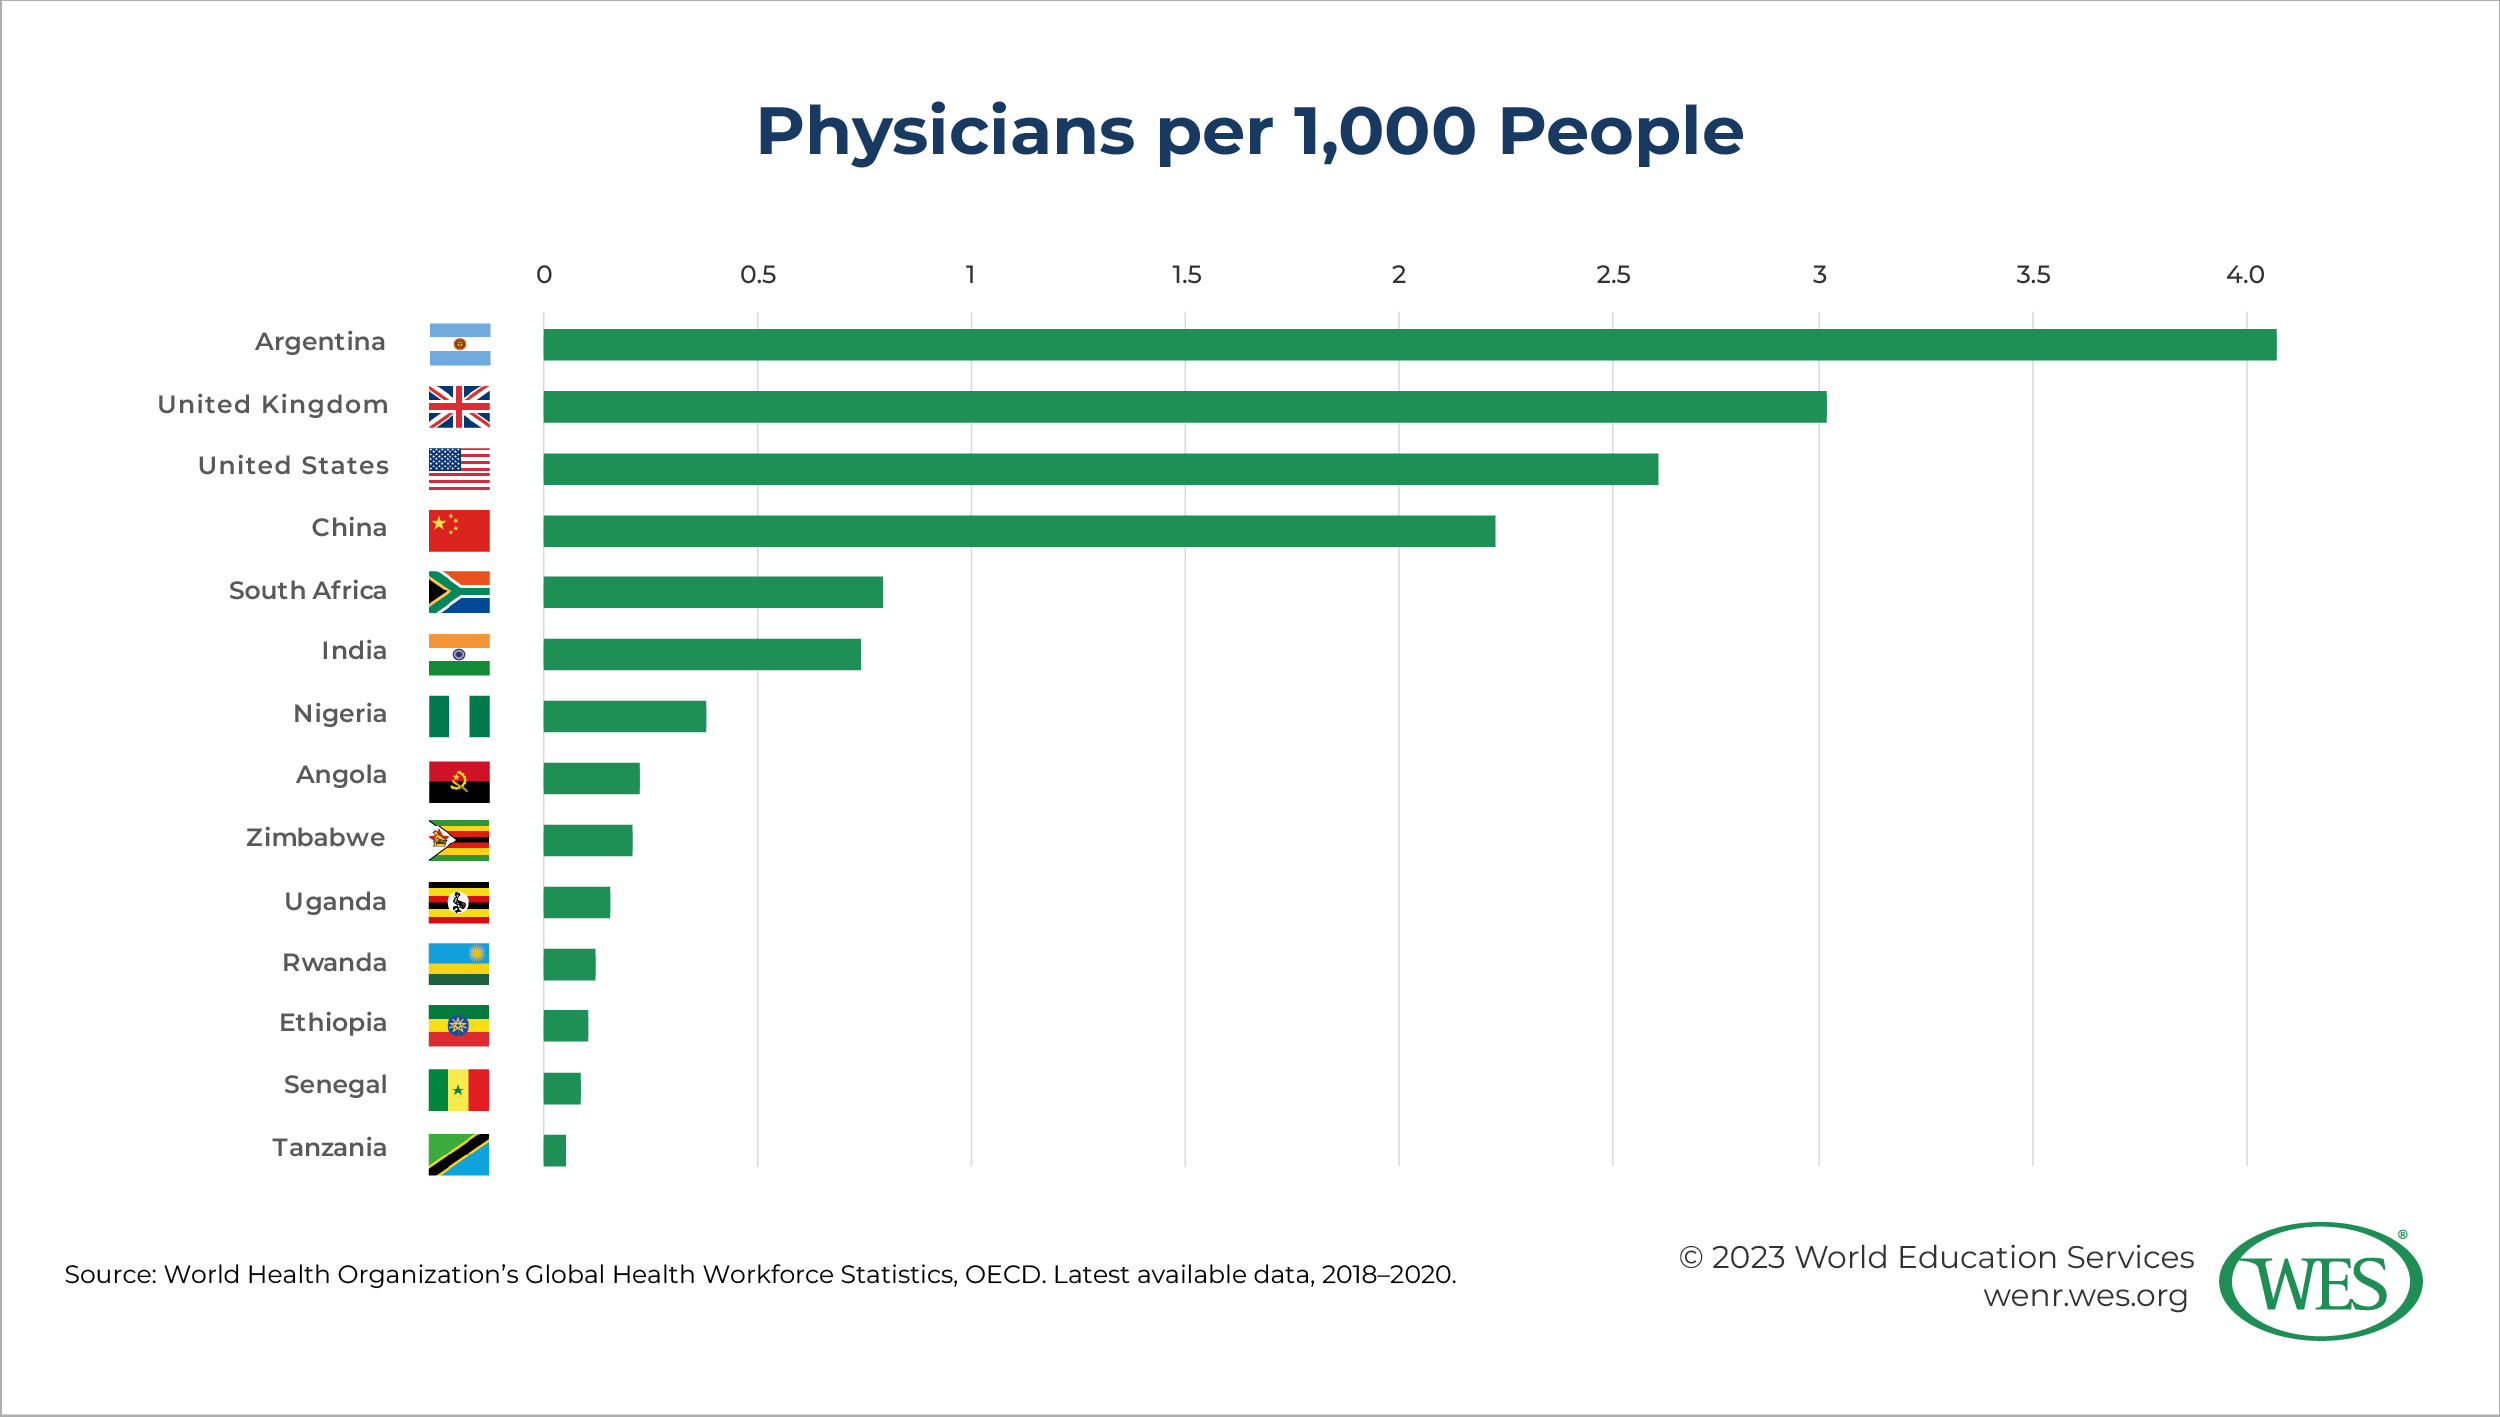 A chart showing the number of physicians per 1,000 people in select countries in Africa and around the world.